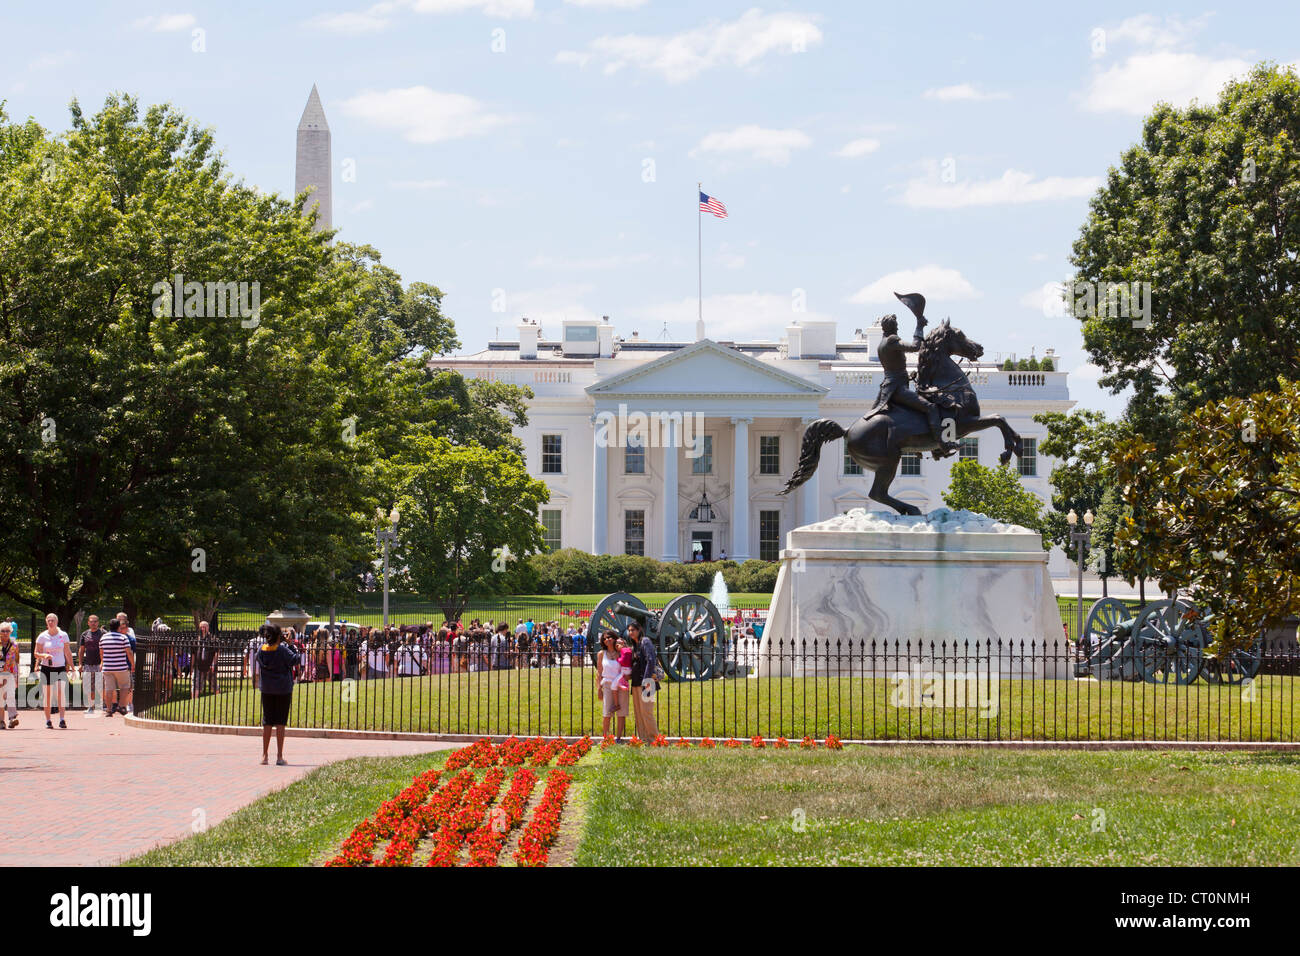 the-white-house-north-portico-from-lafayette-square-washington-dc-CT0NMH.jpg